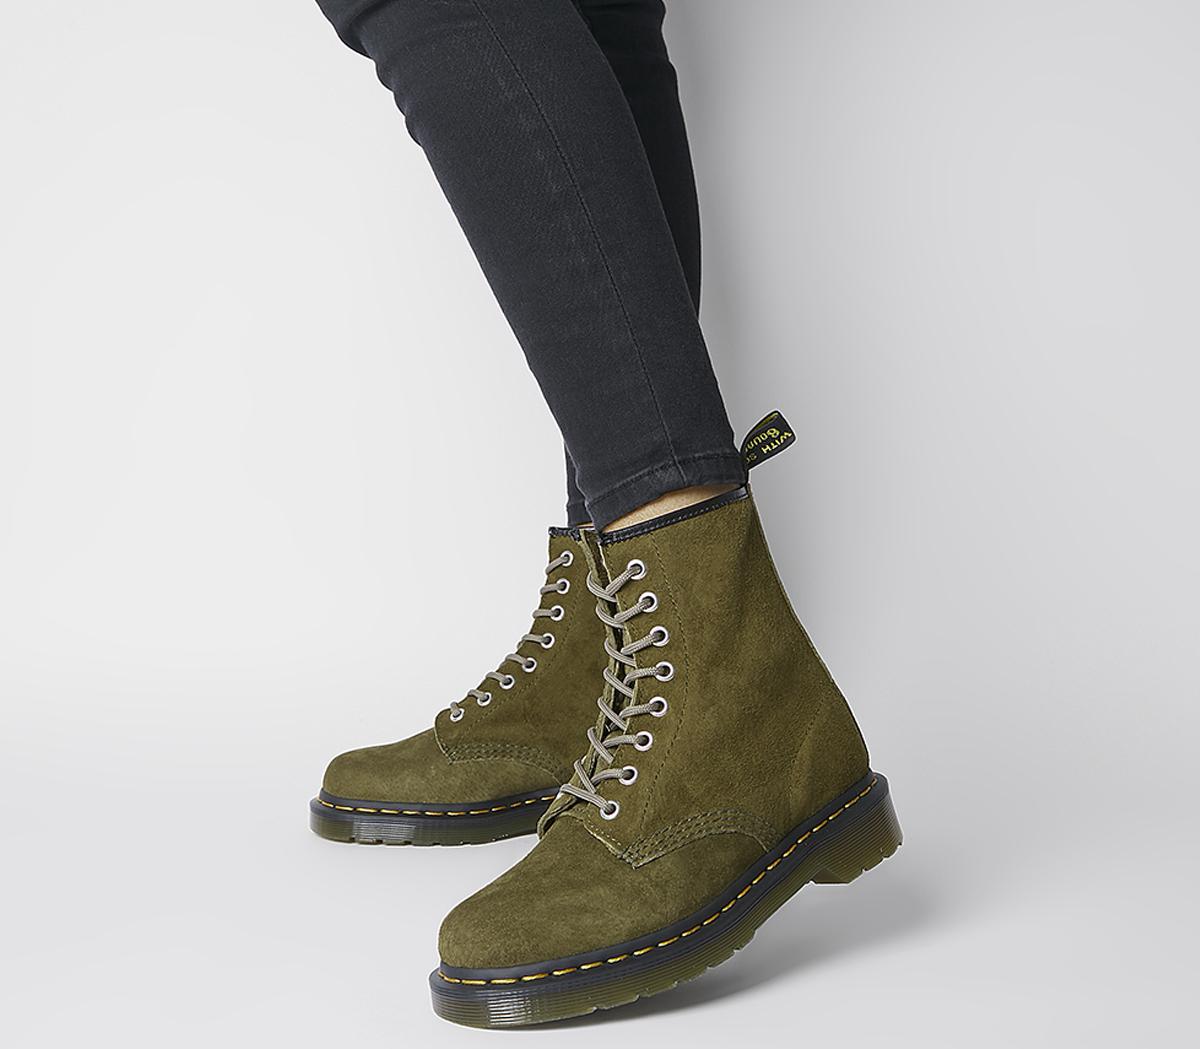 8 Eyelet Lace Up Boots Grenade Green 